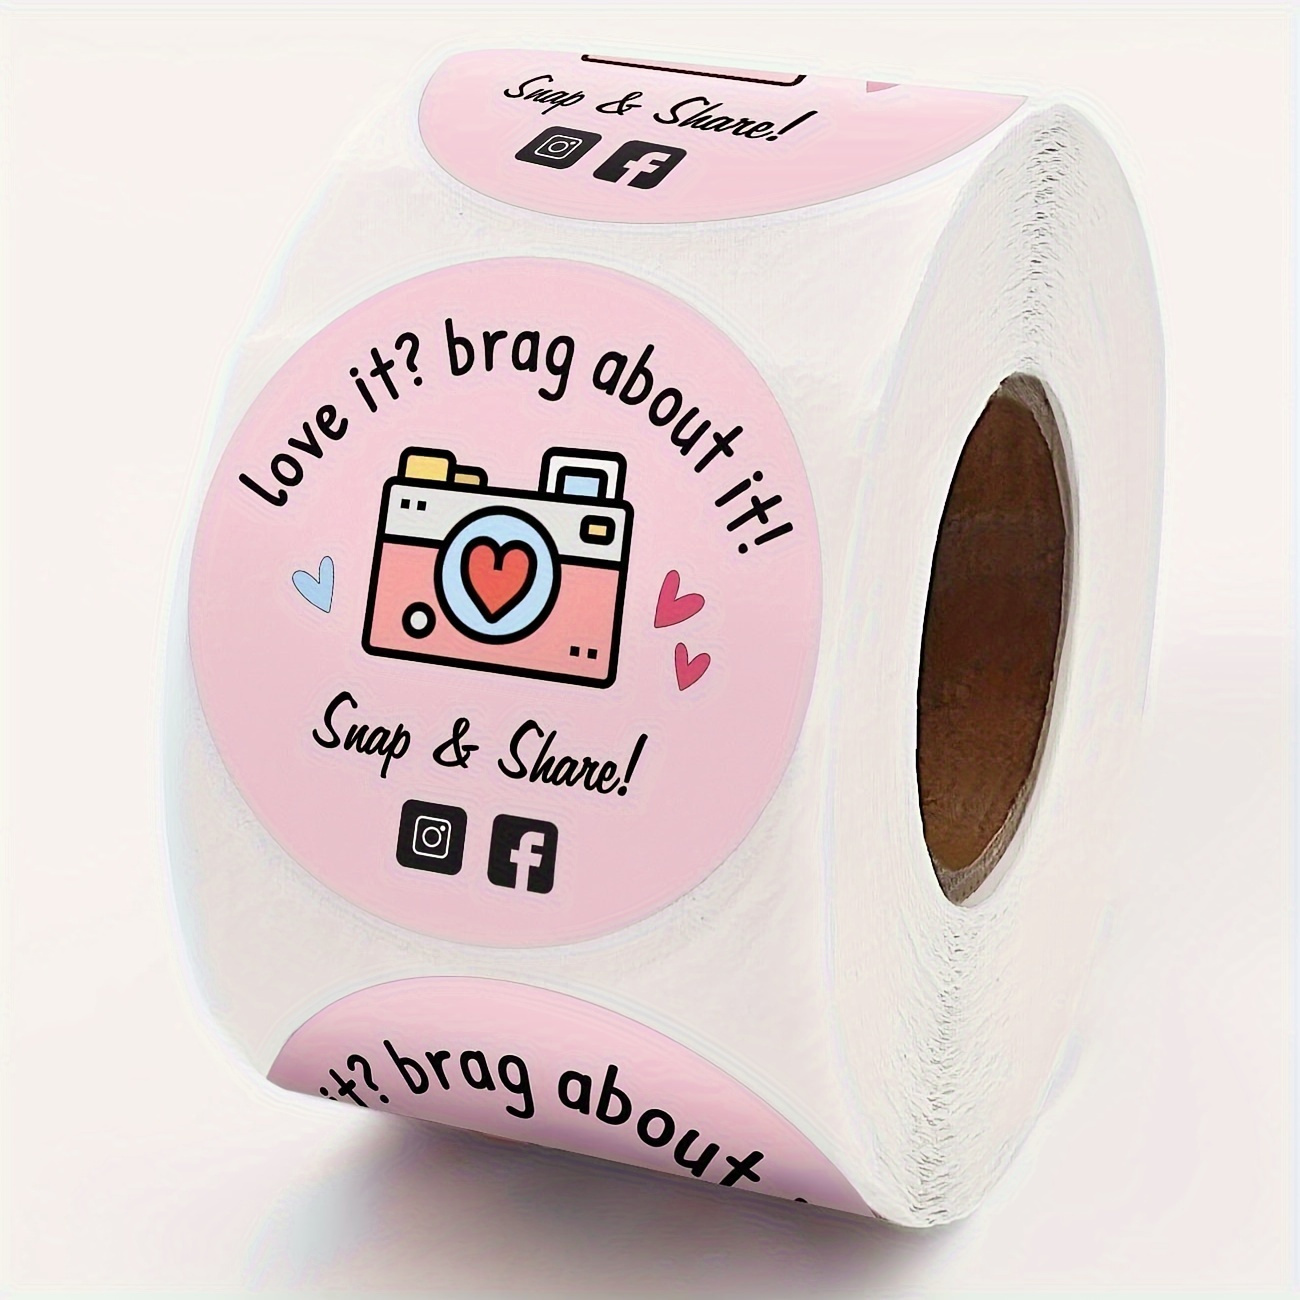 

Cute Pink Retro Camera Design Stickers, Snapshot And Sharing Thank-you Stickers, Online Retailer Mail Envelope Packaging Stickers Labels Shipping Stickers For Small Businesses, 500.